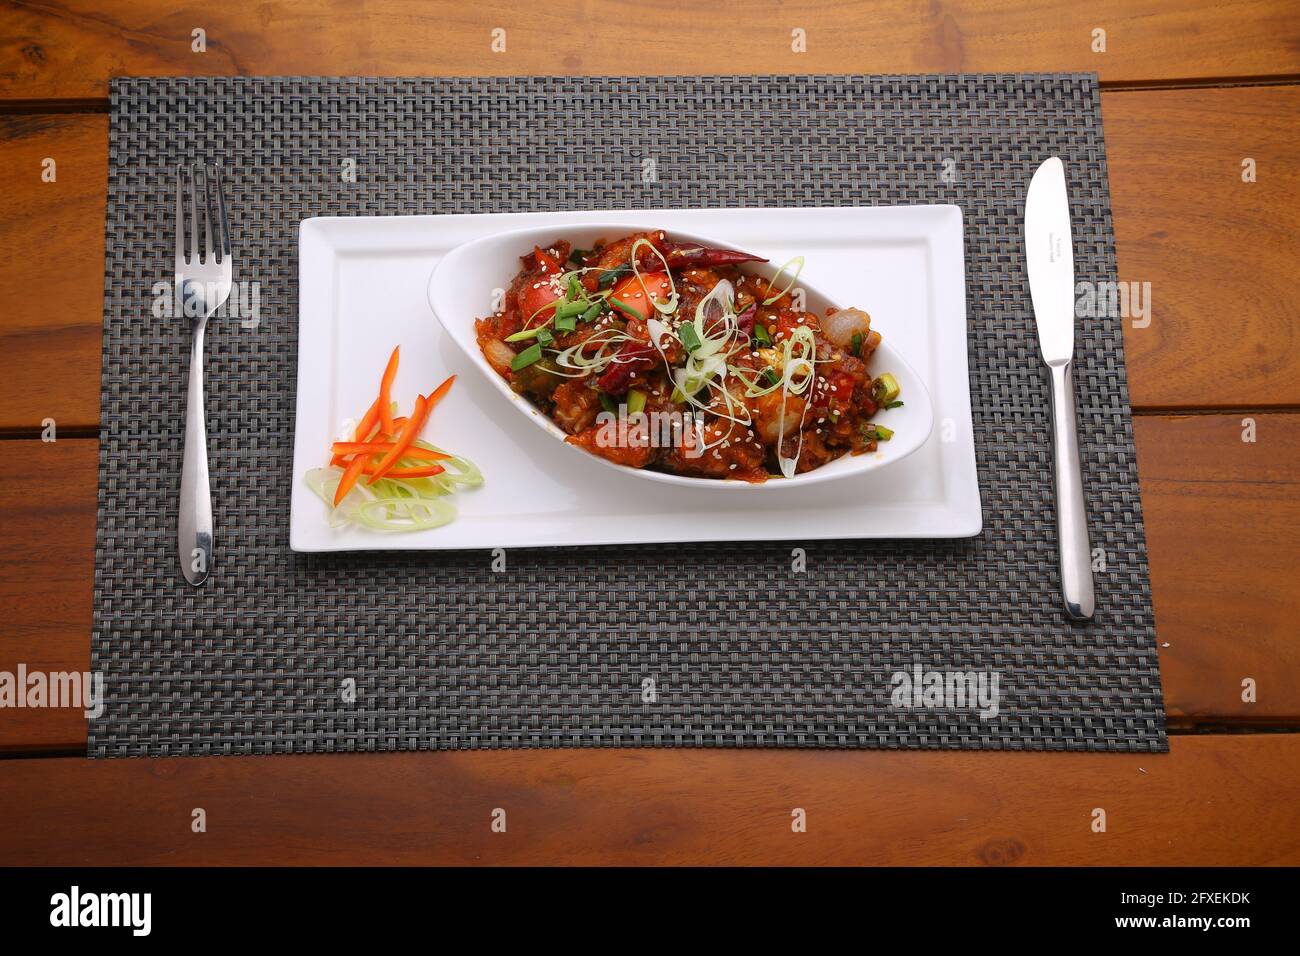 Chilli Chicken dry,well garnished and arranged in an oval shaped bowl on a white serving plate placed on a grey mat  with wooden texture Stock Photo